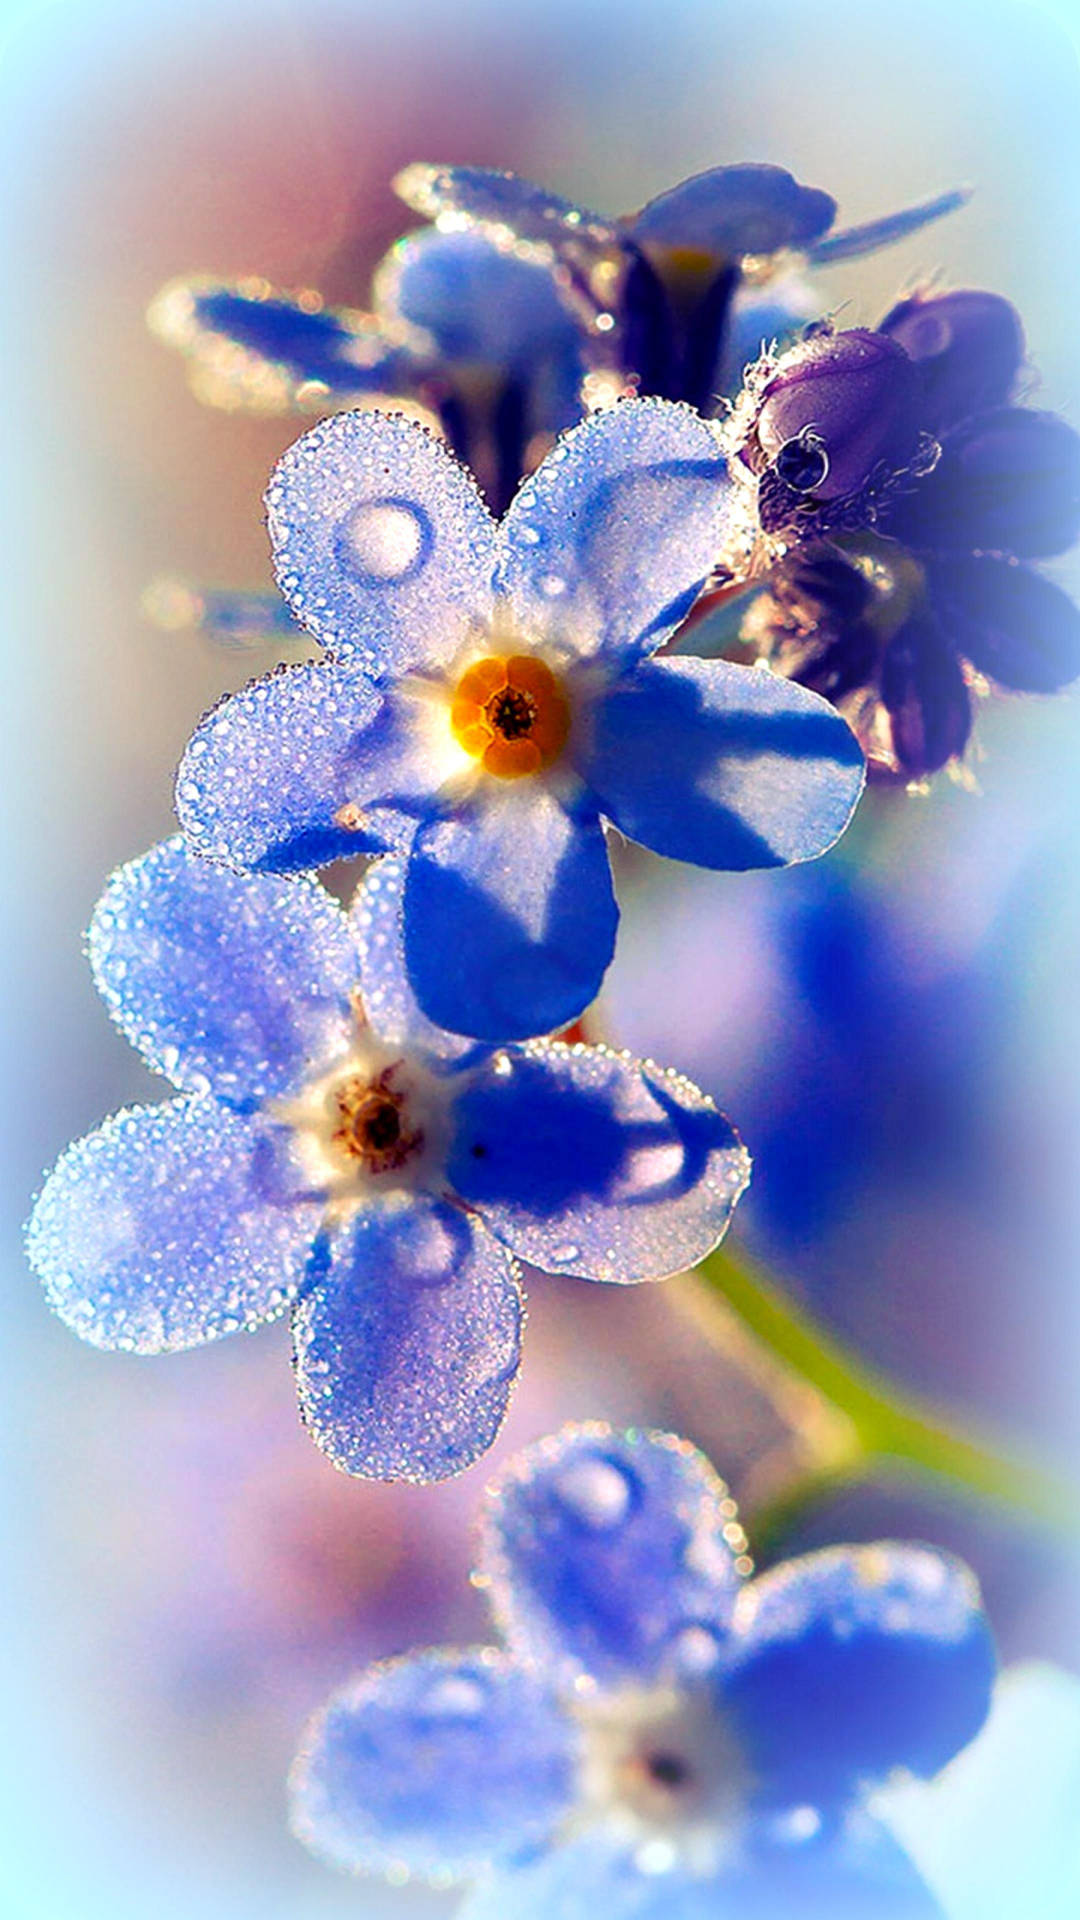 Dreamy Blooms Of Blue Forget-me-not Flowers Background